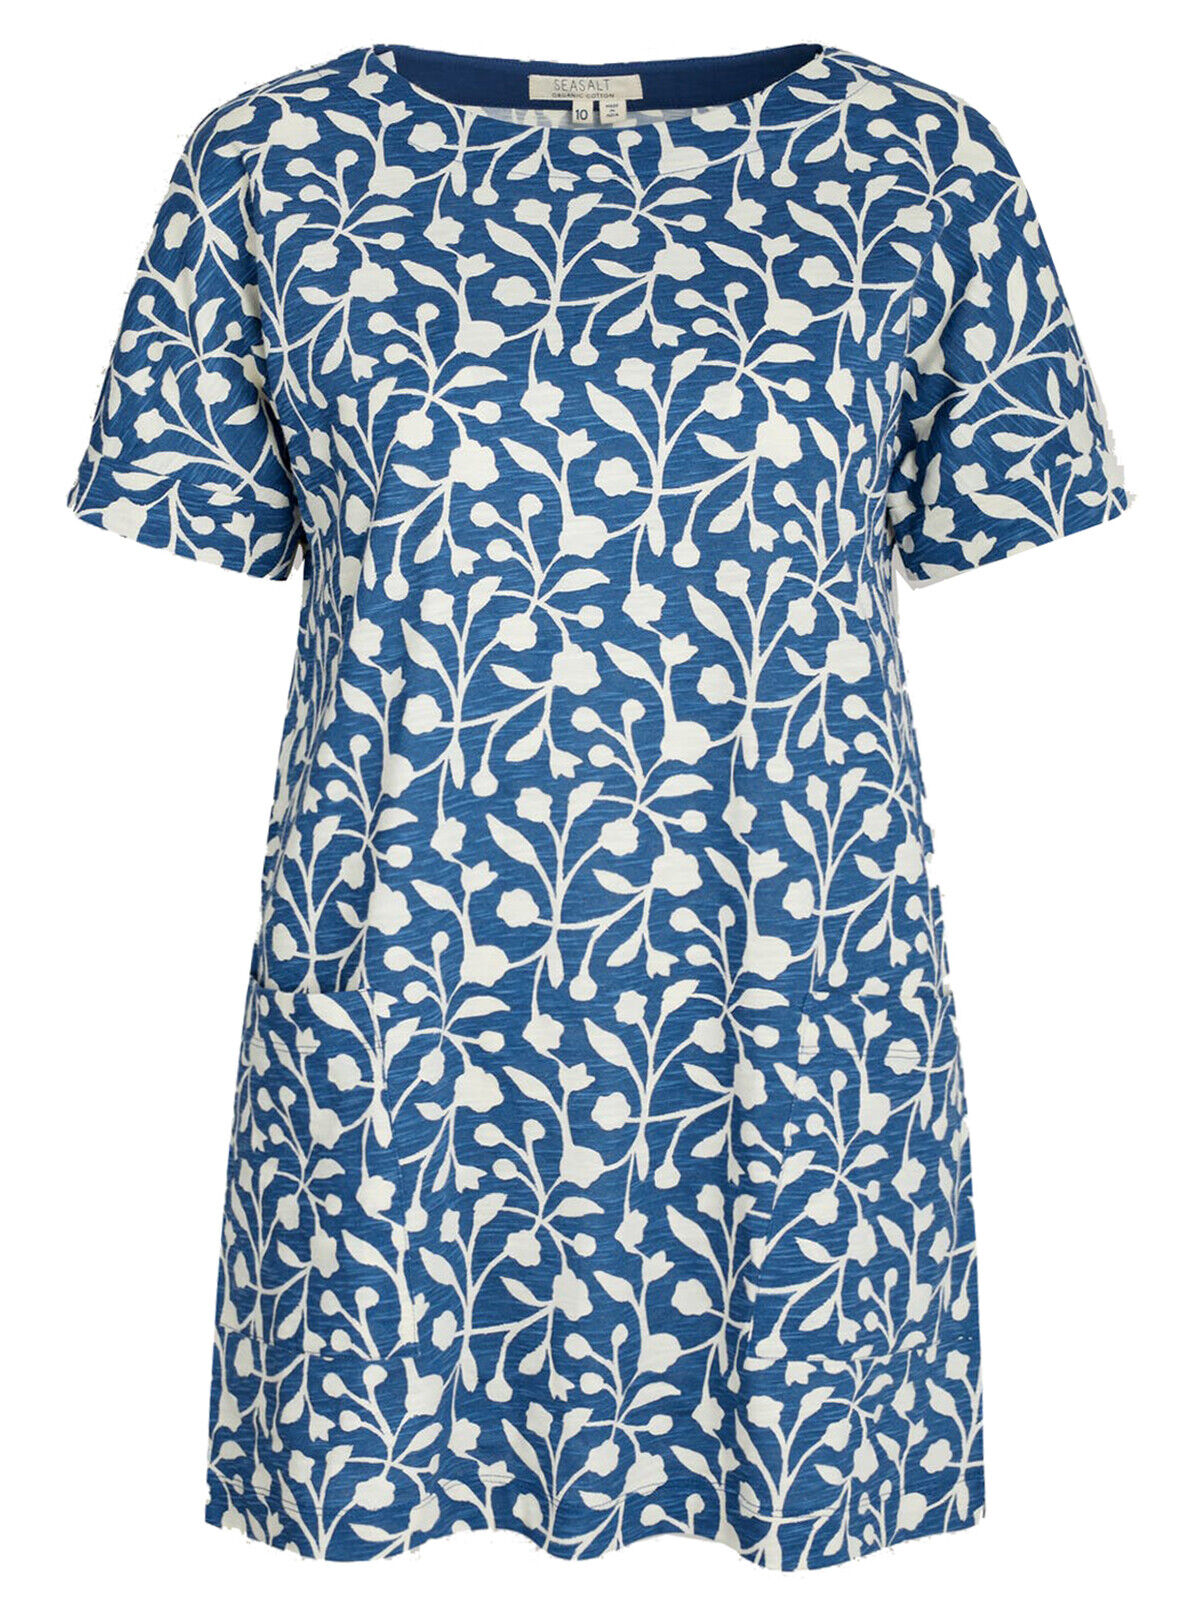 EX SEASALT Blue Floral Silhouette Mussel Hedra Tunic in Size 8 RRP £45